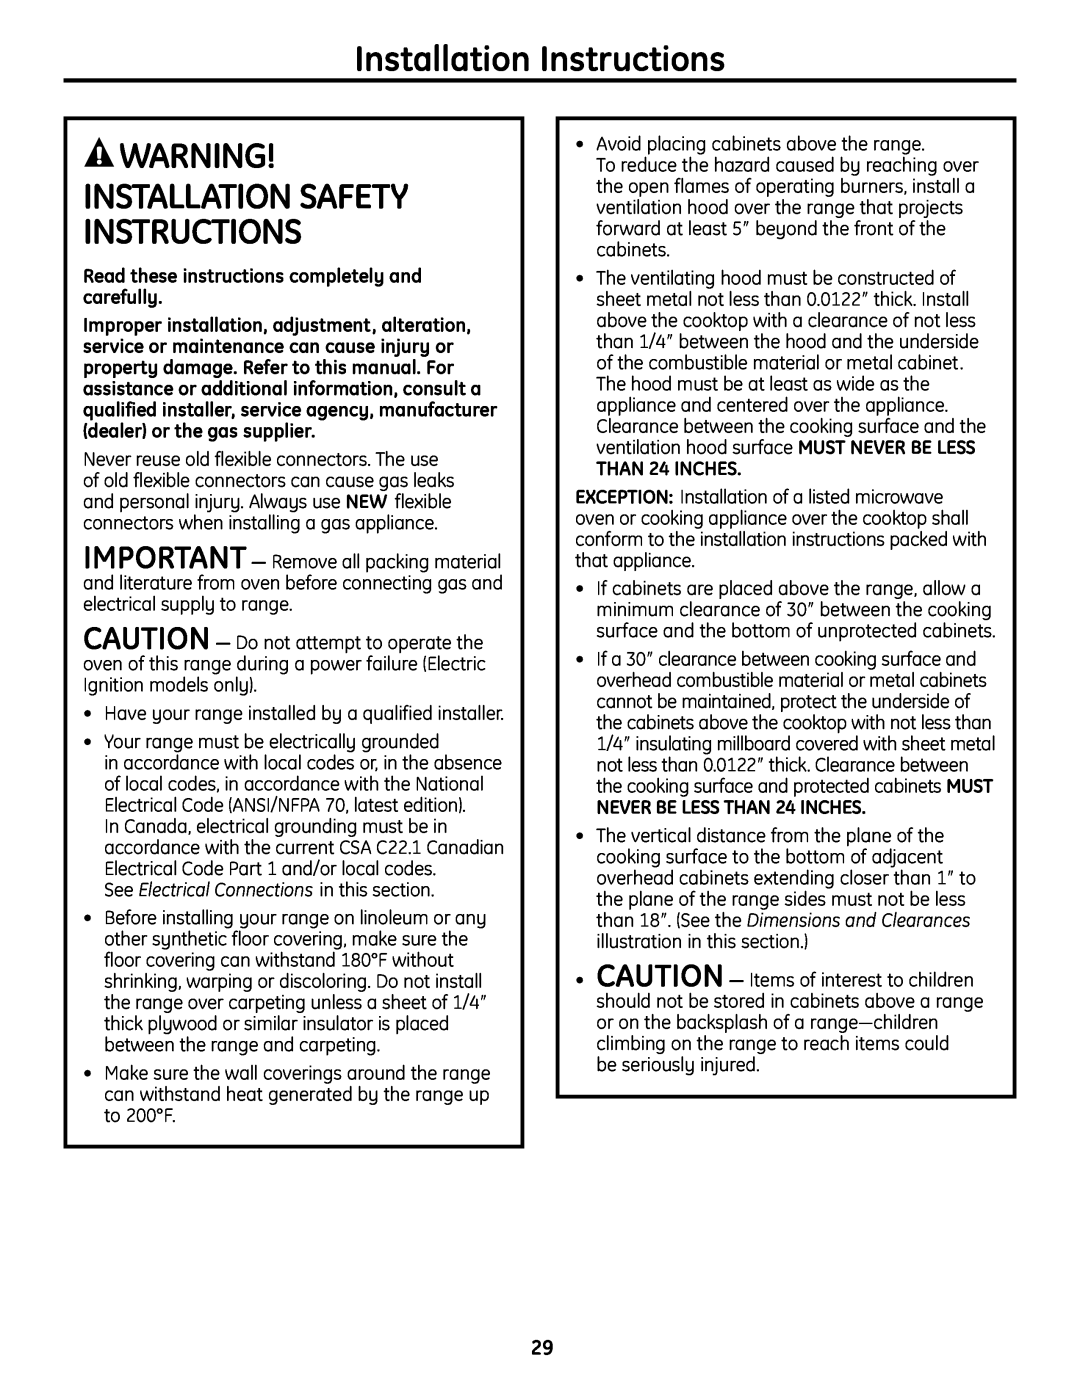 GE JGBS19 Installation Safety Instructions, Installation Instructions, Read these instructions completely and carefully 